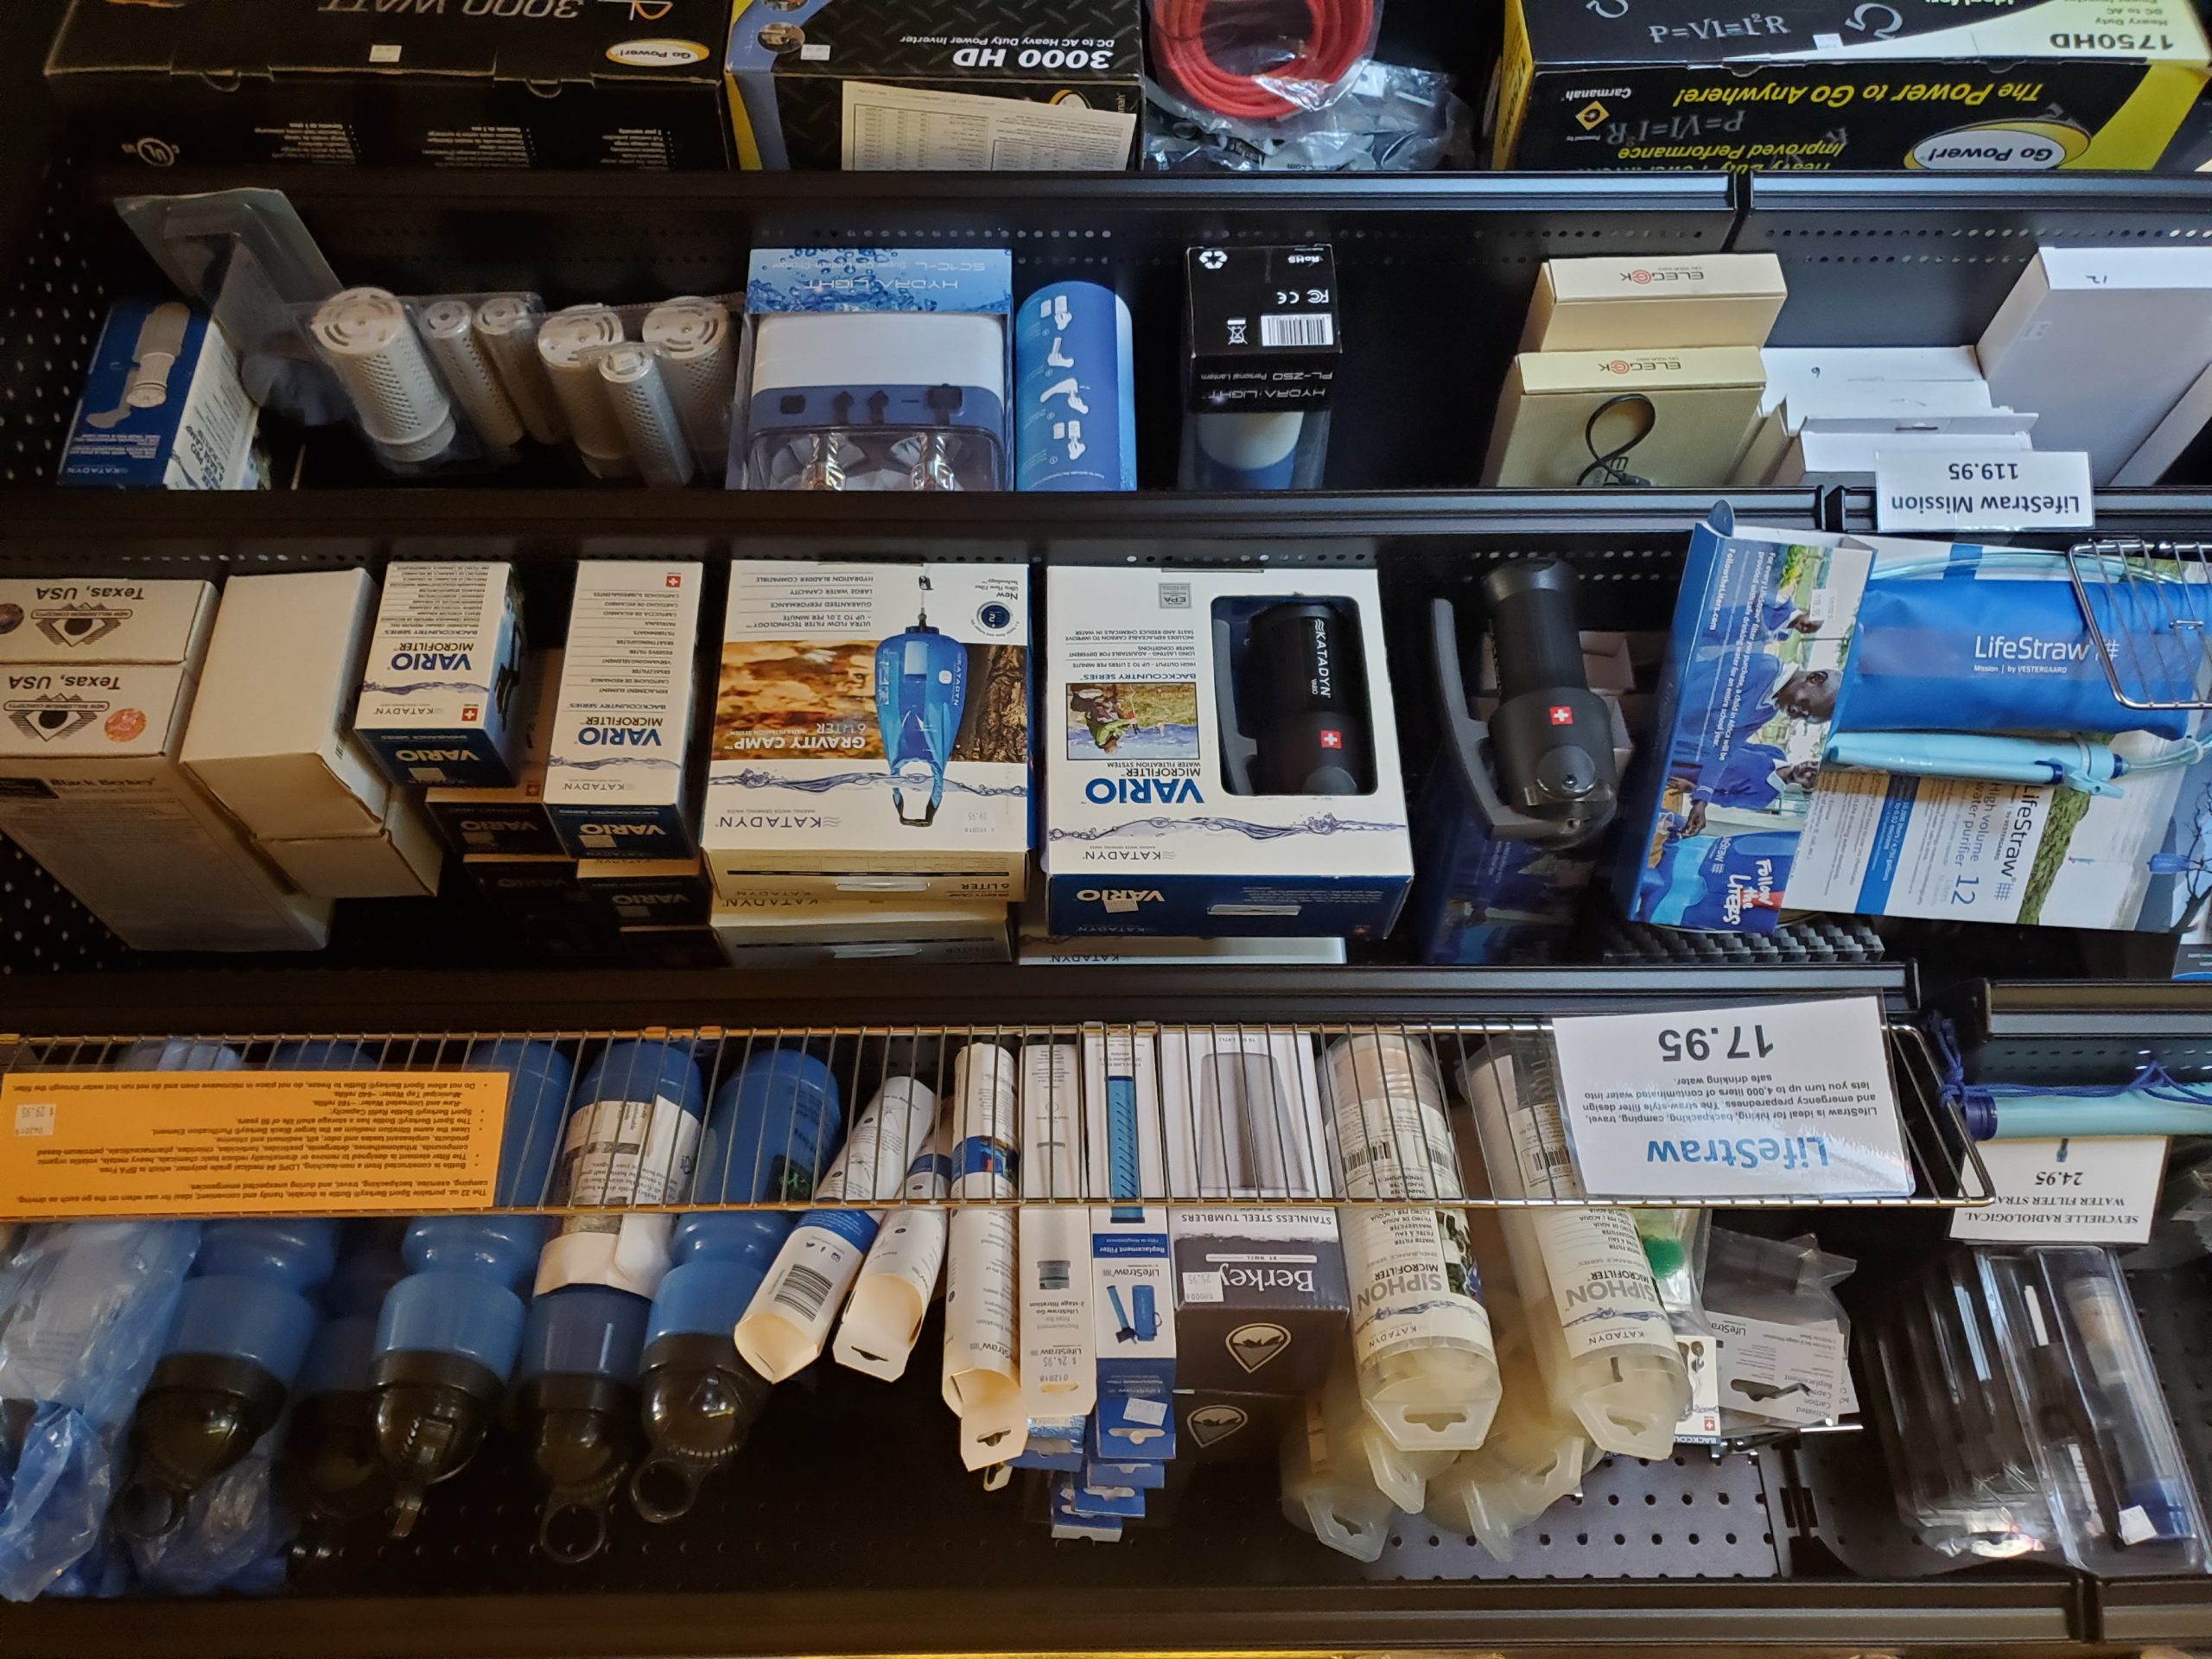 Flashlight Outlet stocks Berkey water filtration systems and Katadyn and Lifestraw products